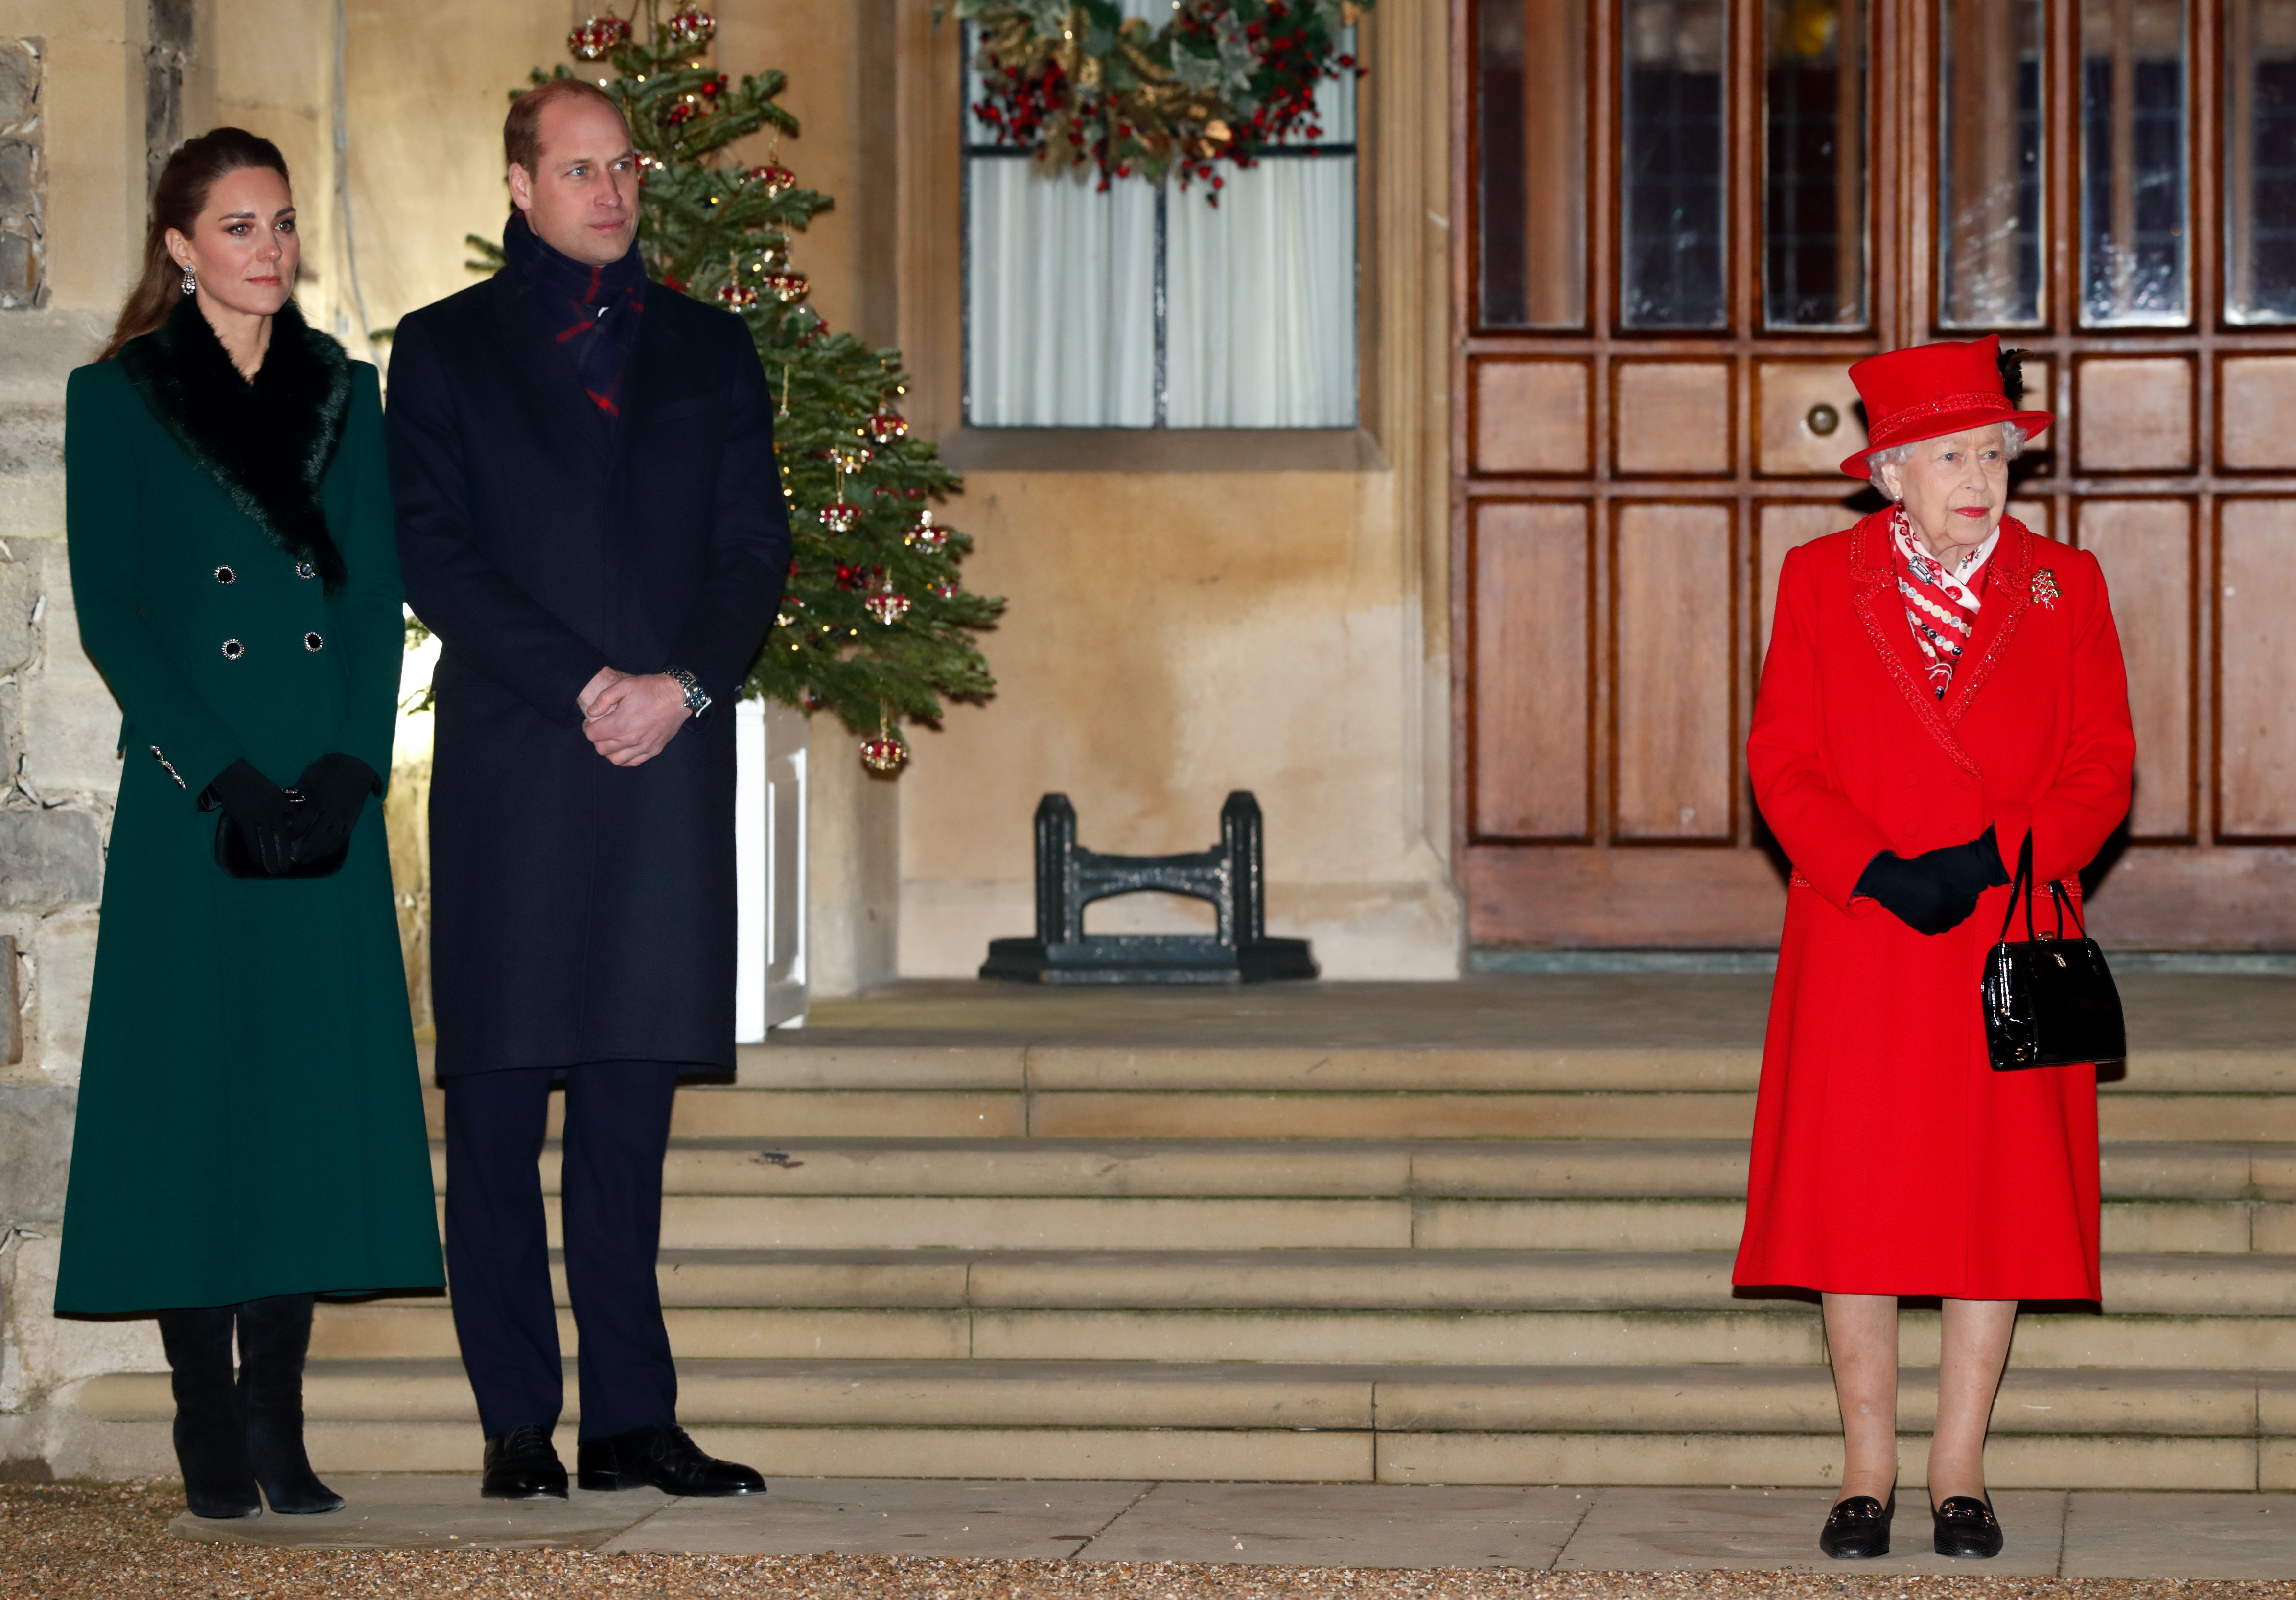 The Duke and Duchess of Cambridge stand with Queen Elizabeth in Windsor Castle while attending an event held on December 08, 2020 | Source: Getty Images